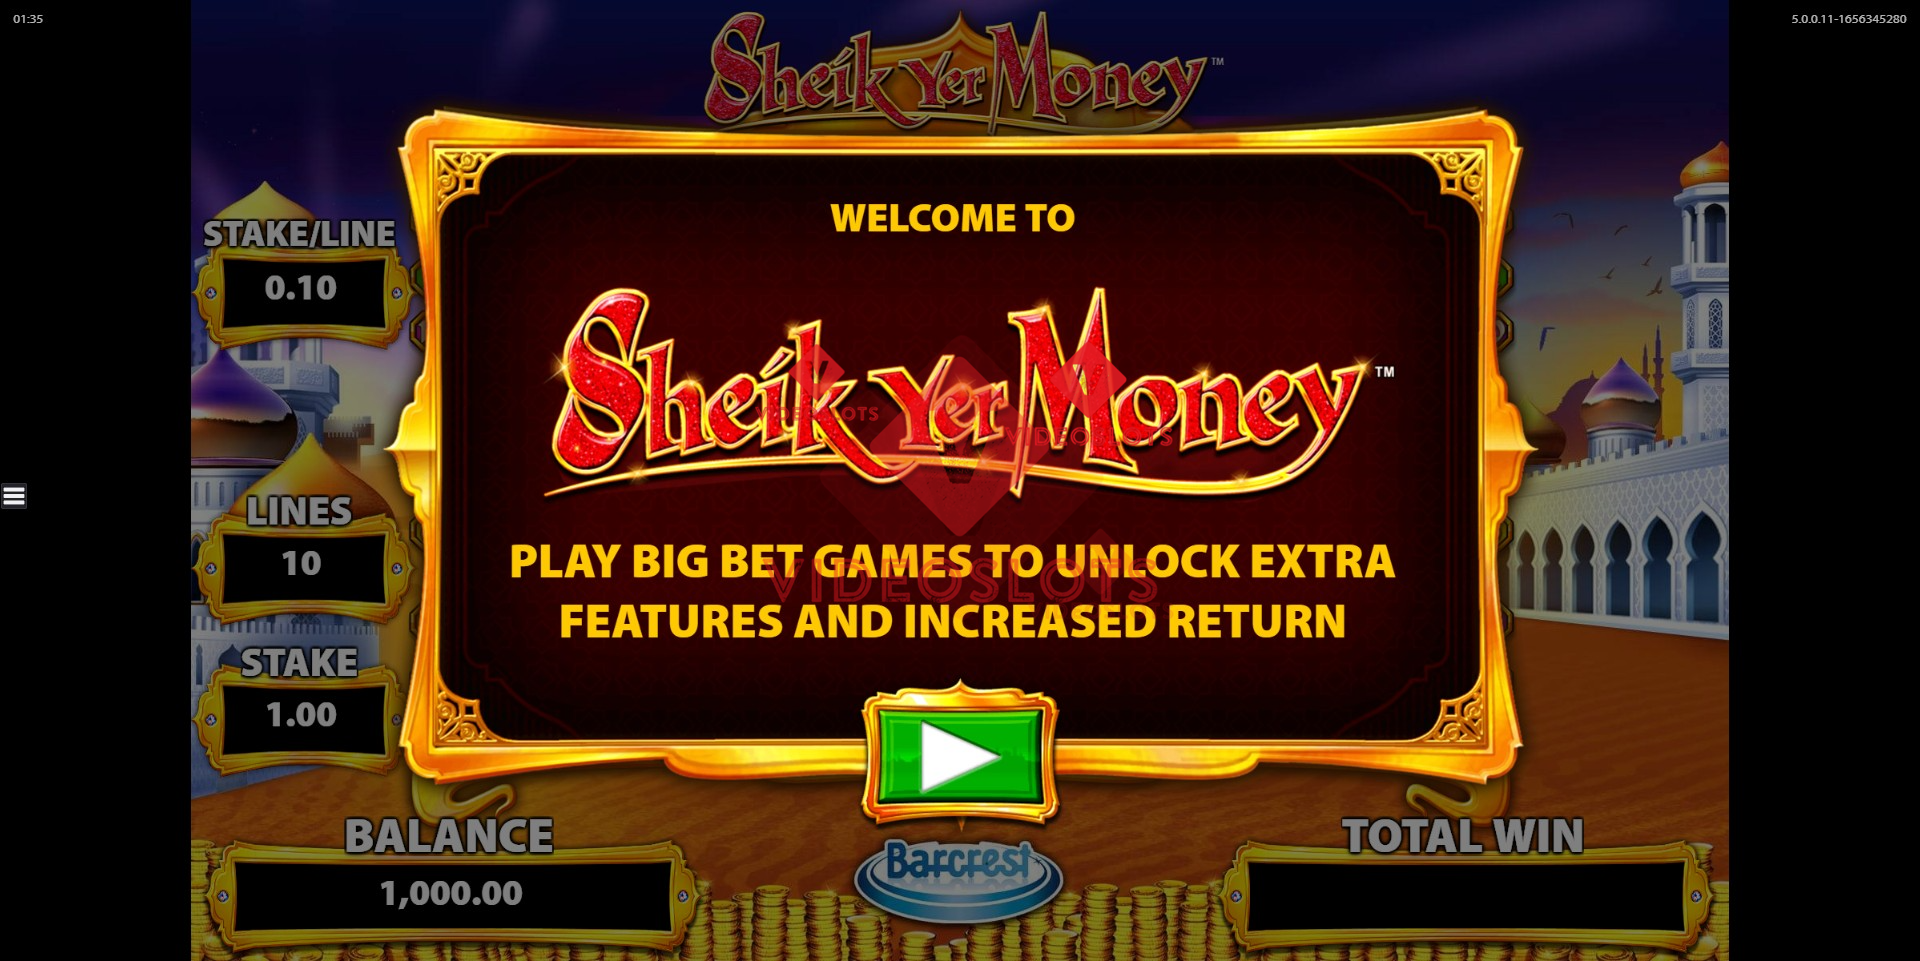 Game Intro for Sheik Yer Money slot from Barcrest